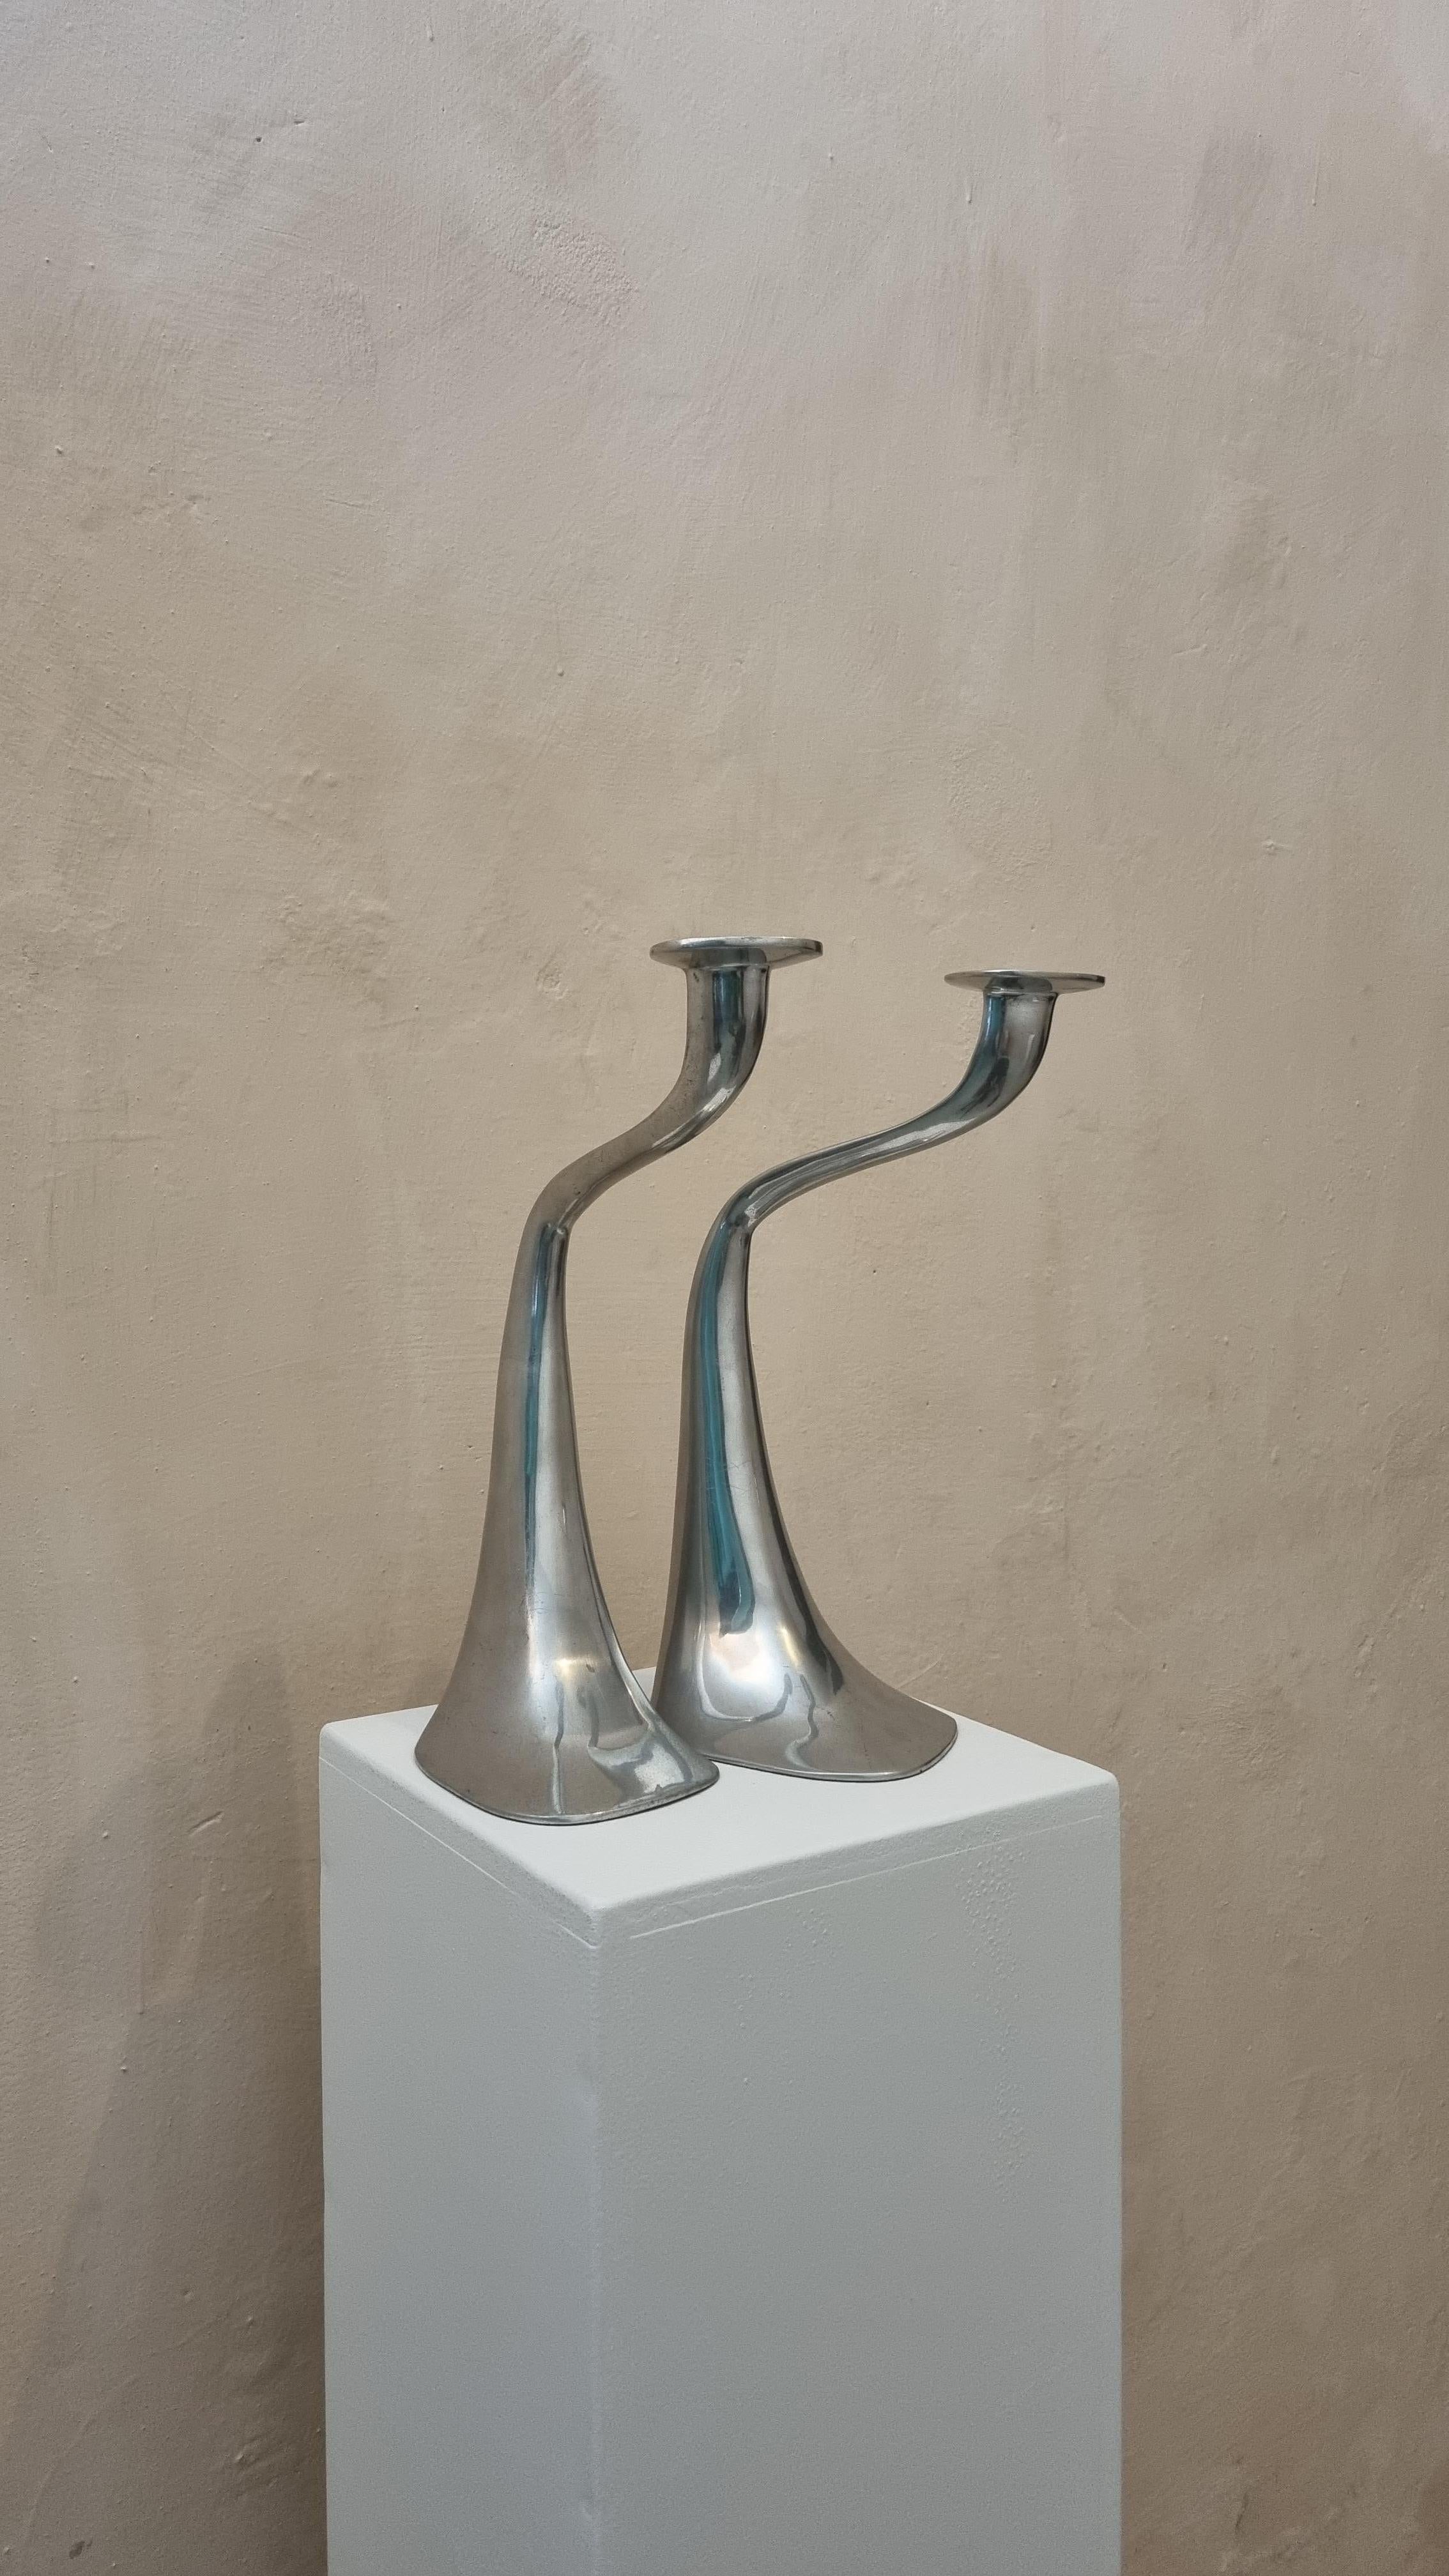 Pair of aluminum candlesticks mod. Turner by Xavier Lust produced by Driade, 90s.
Turner by Xavier Lust is an object with a strong aesthetic impact, which allows you to create numerous decorative variations. These chandeliers made of cast polished